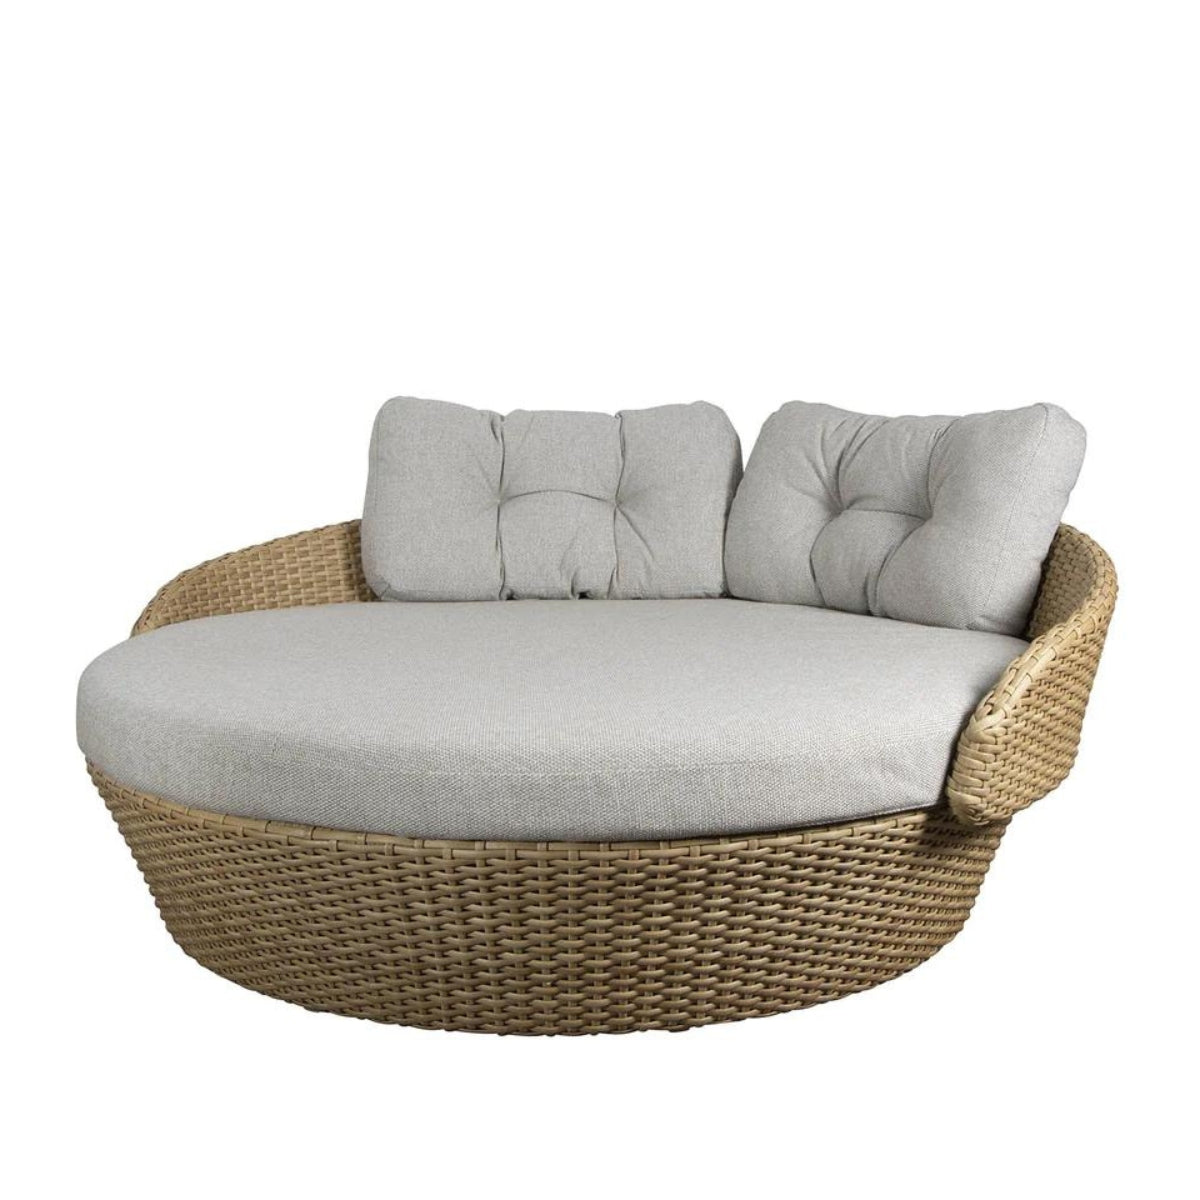 Cane-line | Ocean large daybed